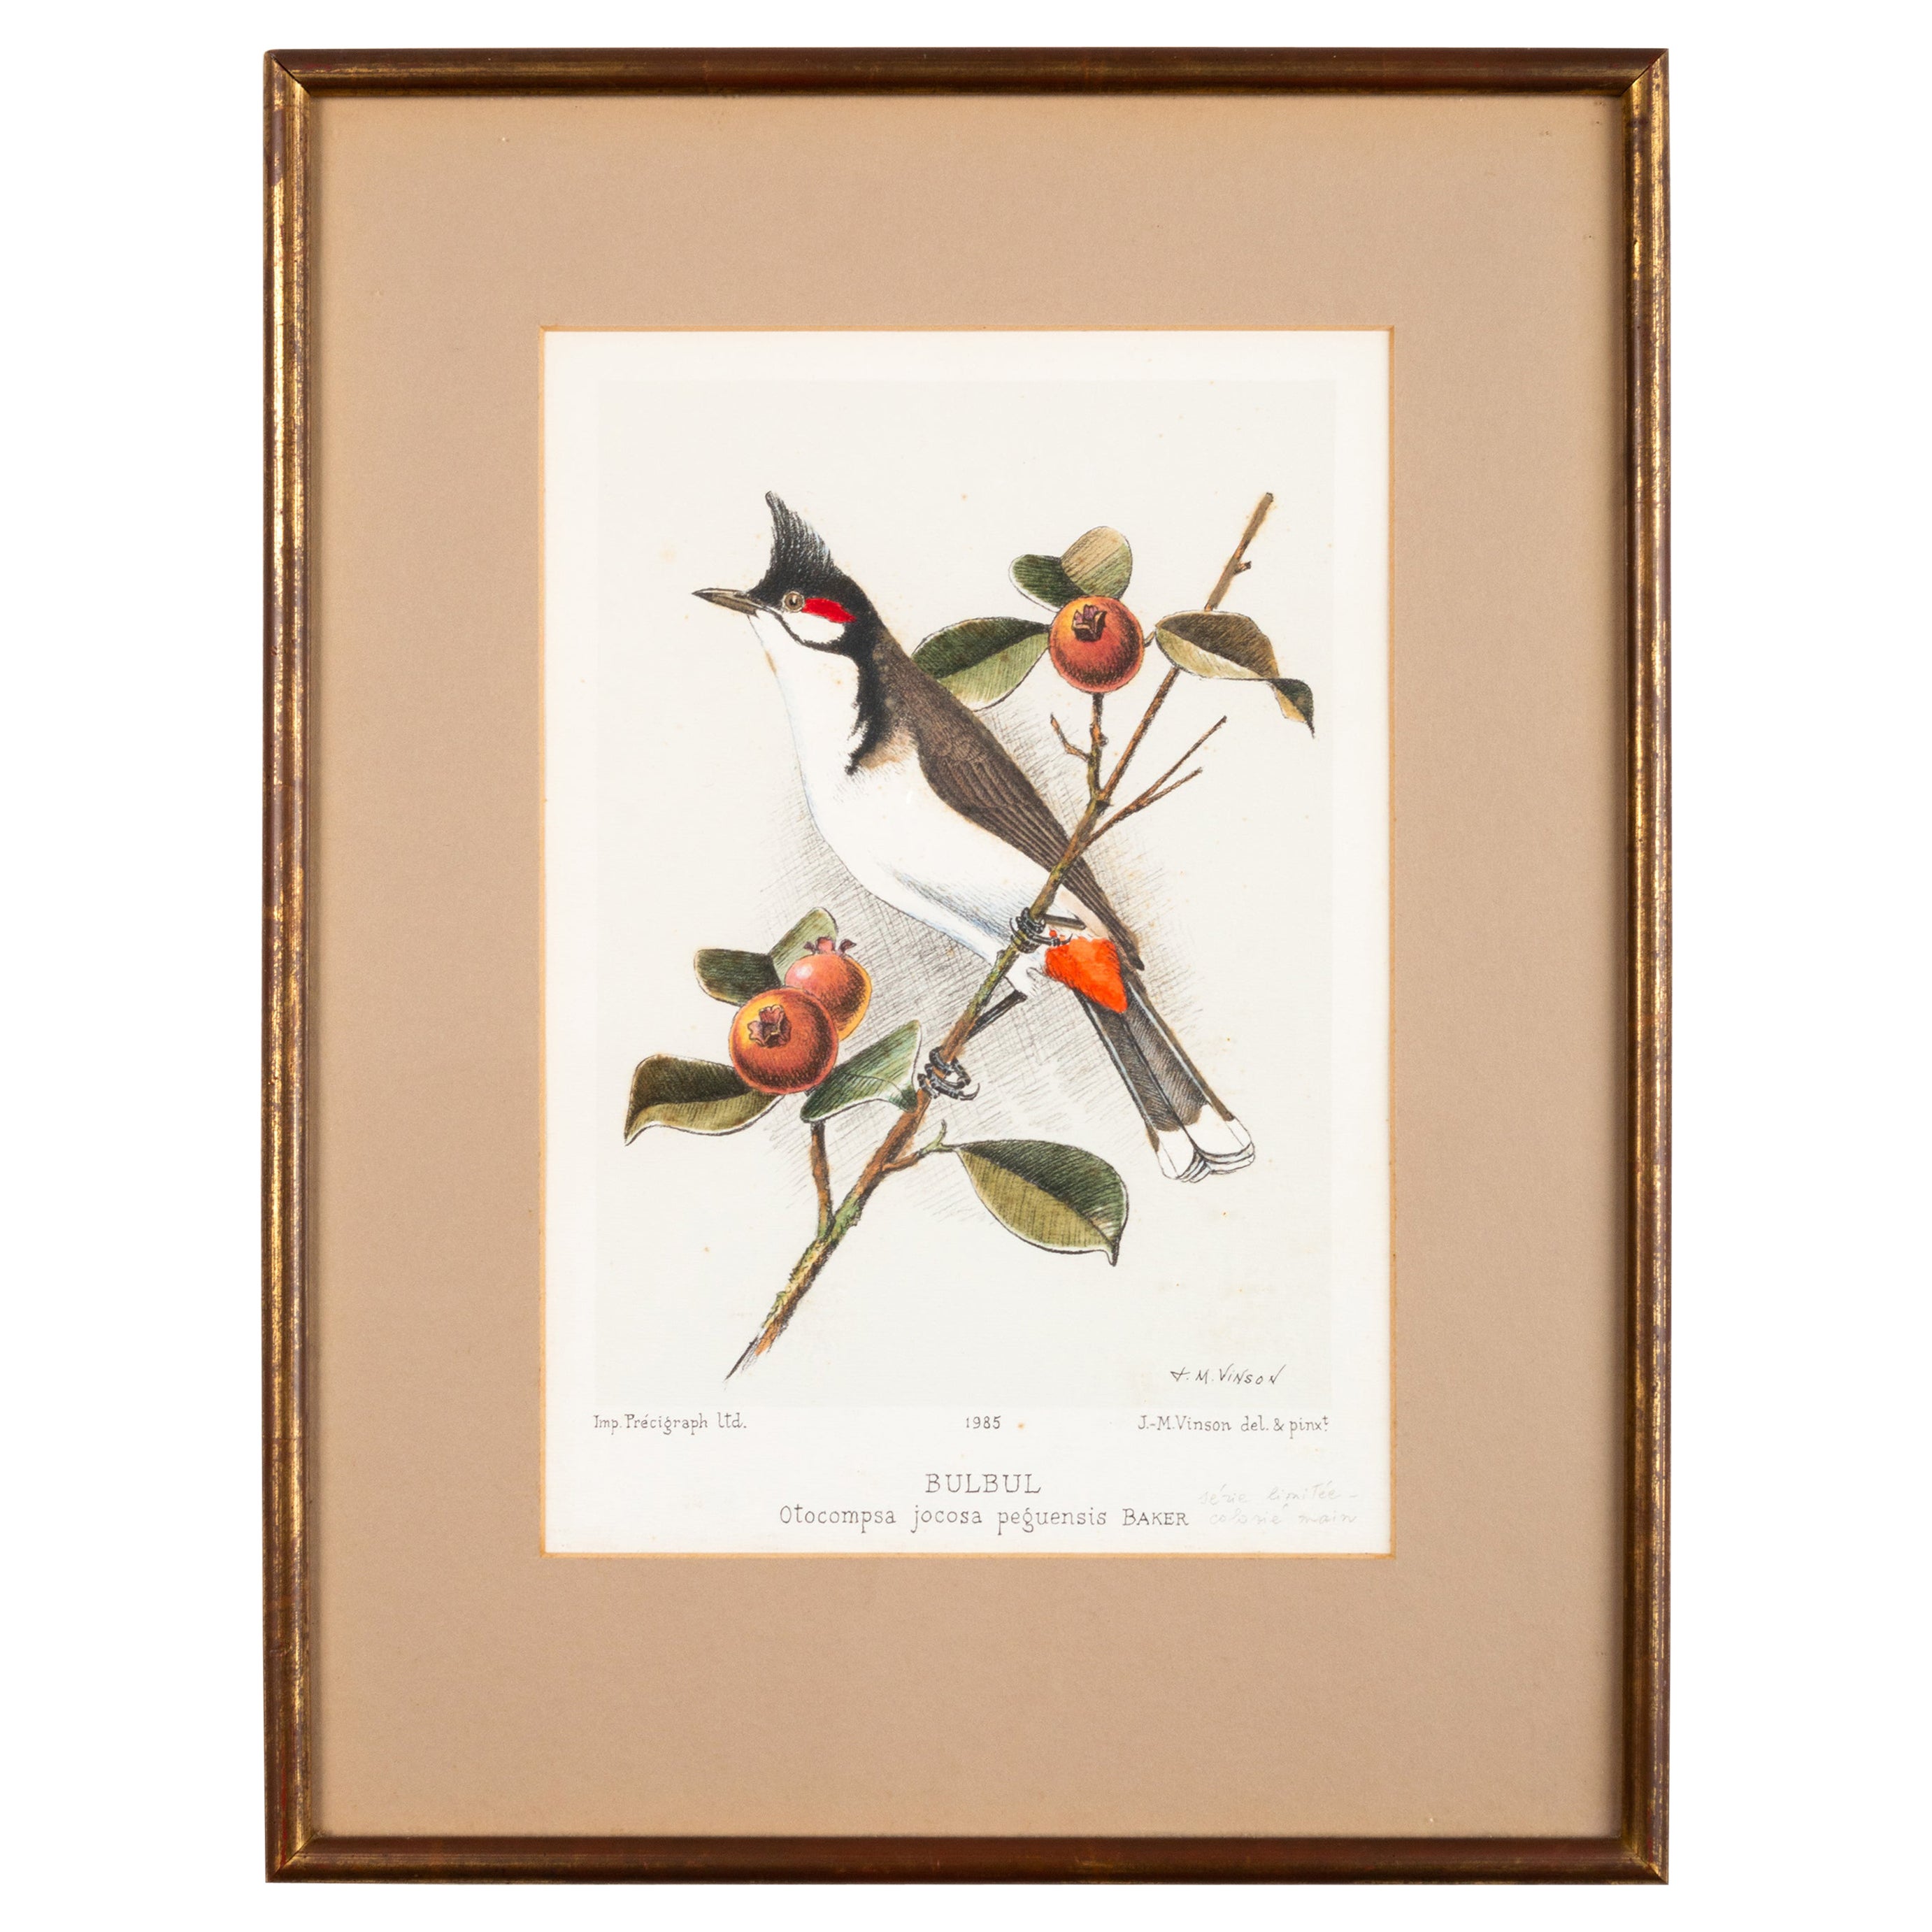 French Chromolithograph of the 'Bulbul' Bird by J.M. Vinson 1985 For Sale